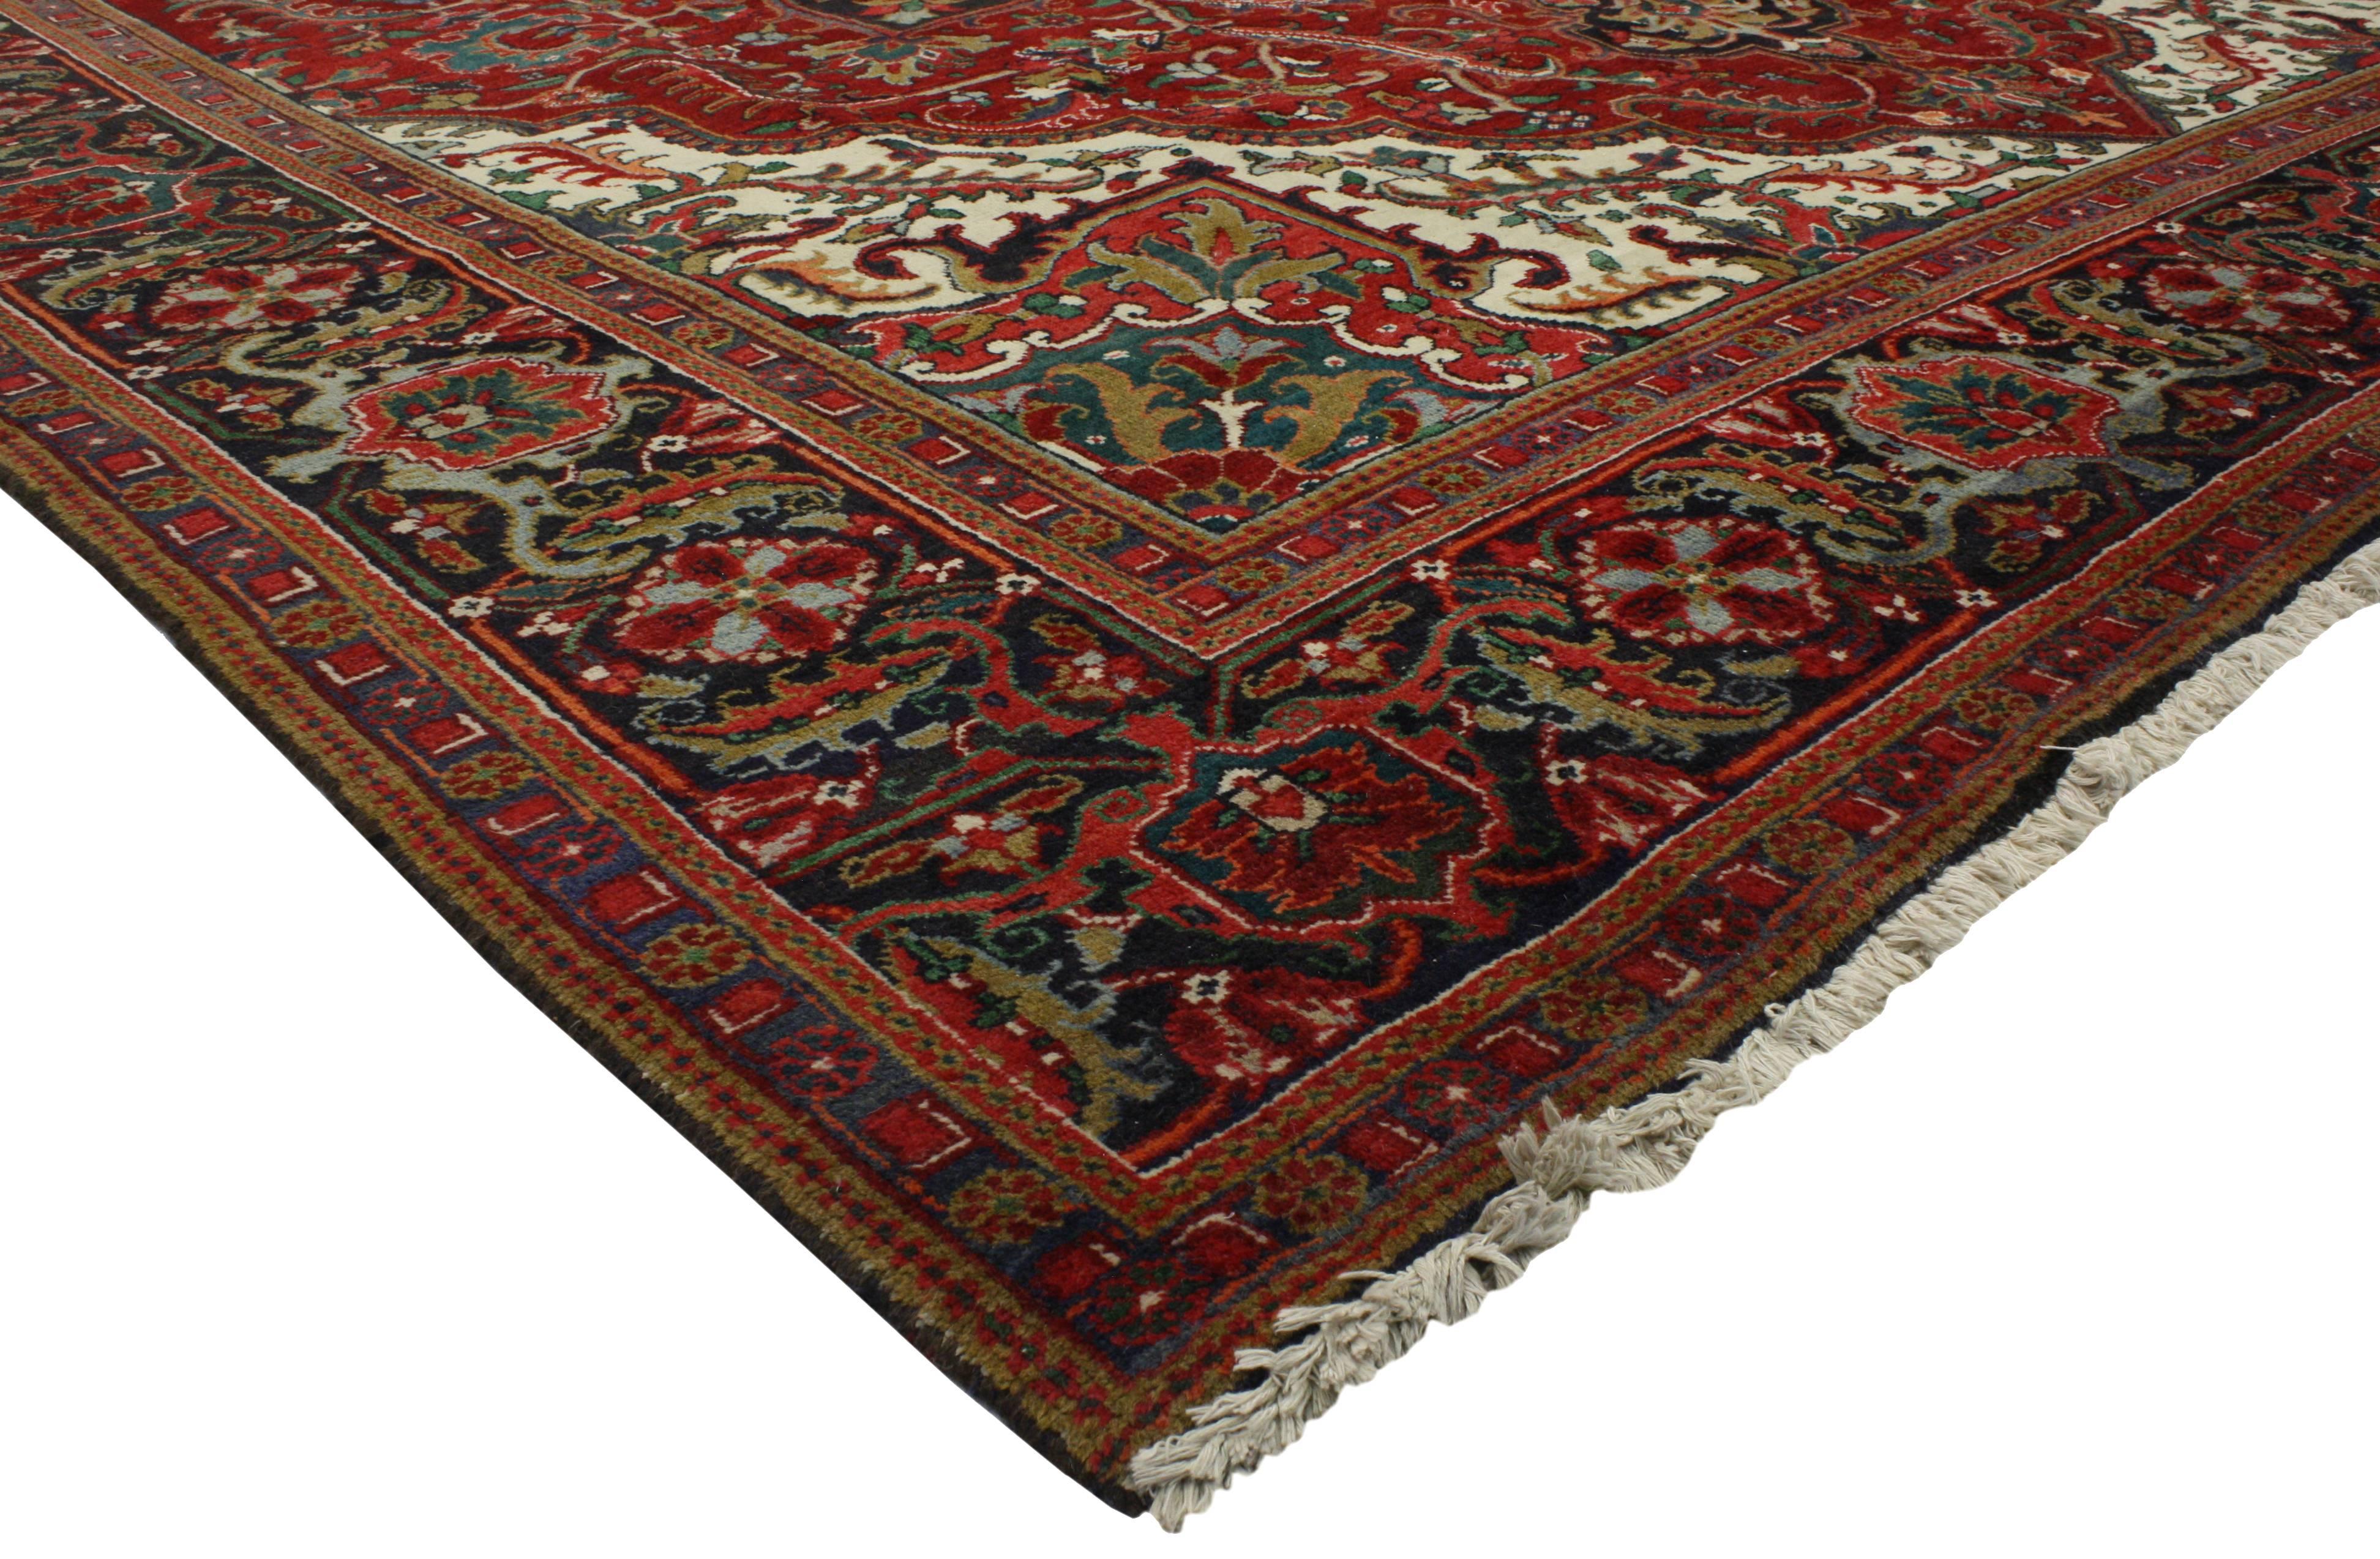 Vintage Persian Heriz Ahar Rug with Modern Rustic Arts & Crafts Style  In Good Condition For Sale In Dallas, TX